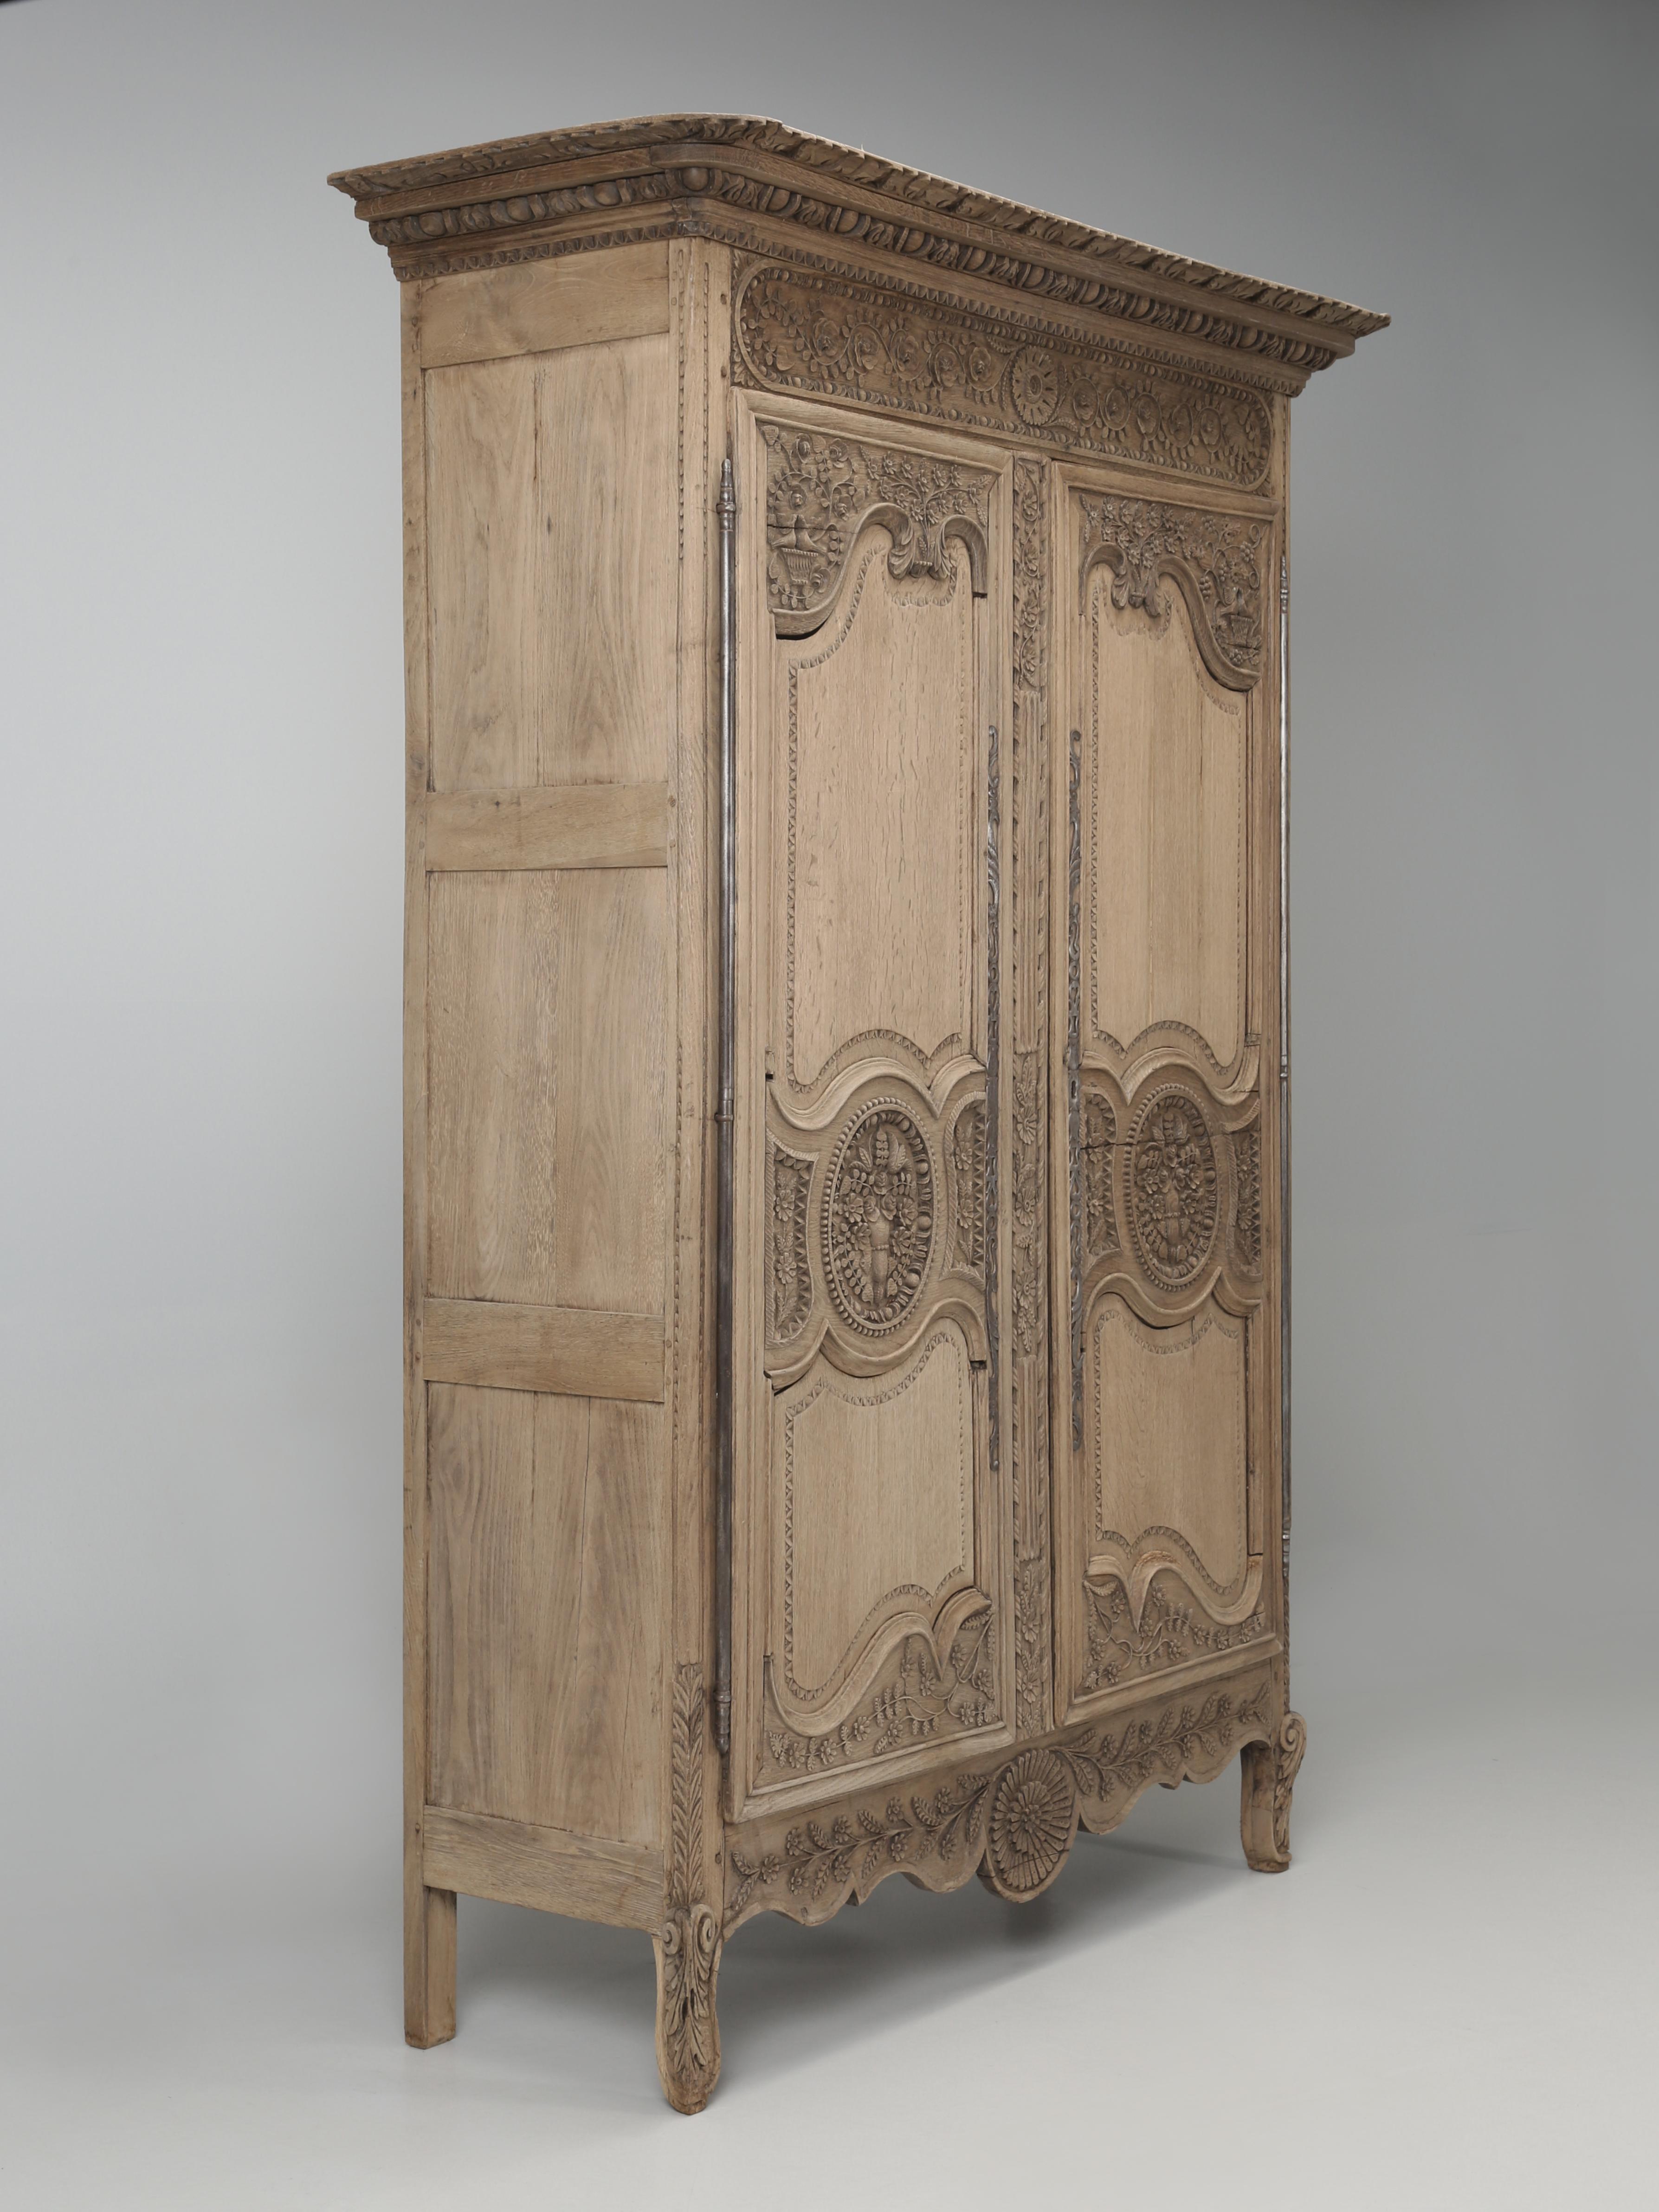 Country Antique French Oak Armoire from Normandy Region of France Unrestored Original